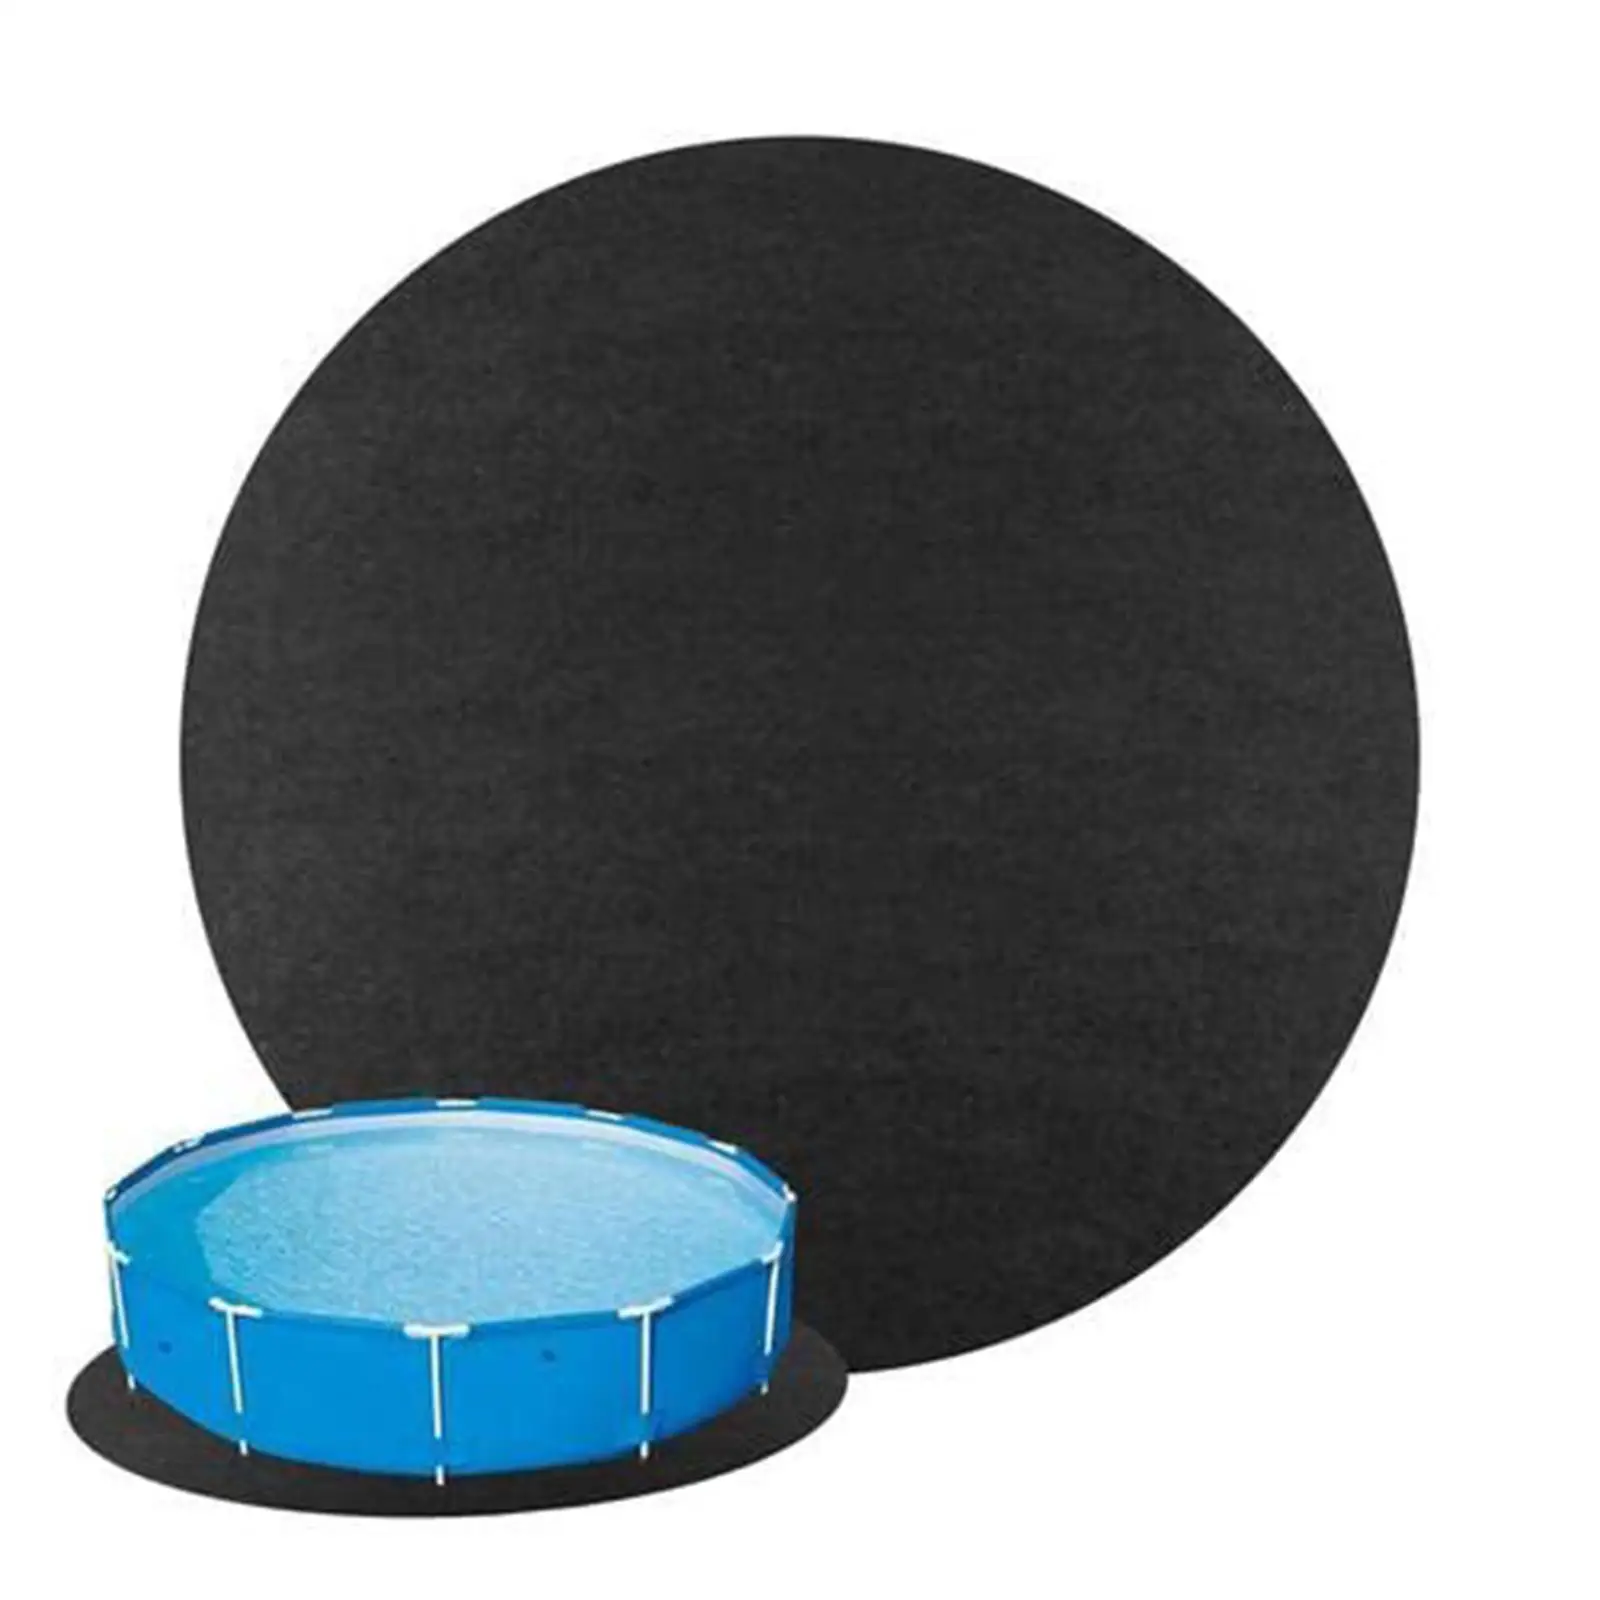 Pool Liner Pads for above Ground Pool, Strong Easy to Install Swimming Pool Liner Pad, for 4m Home Inflatable Pool Outdoor